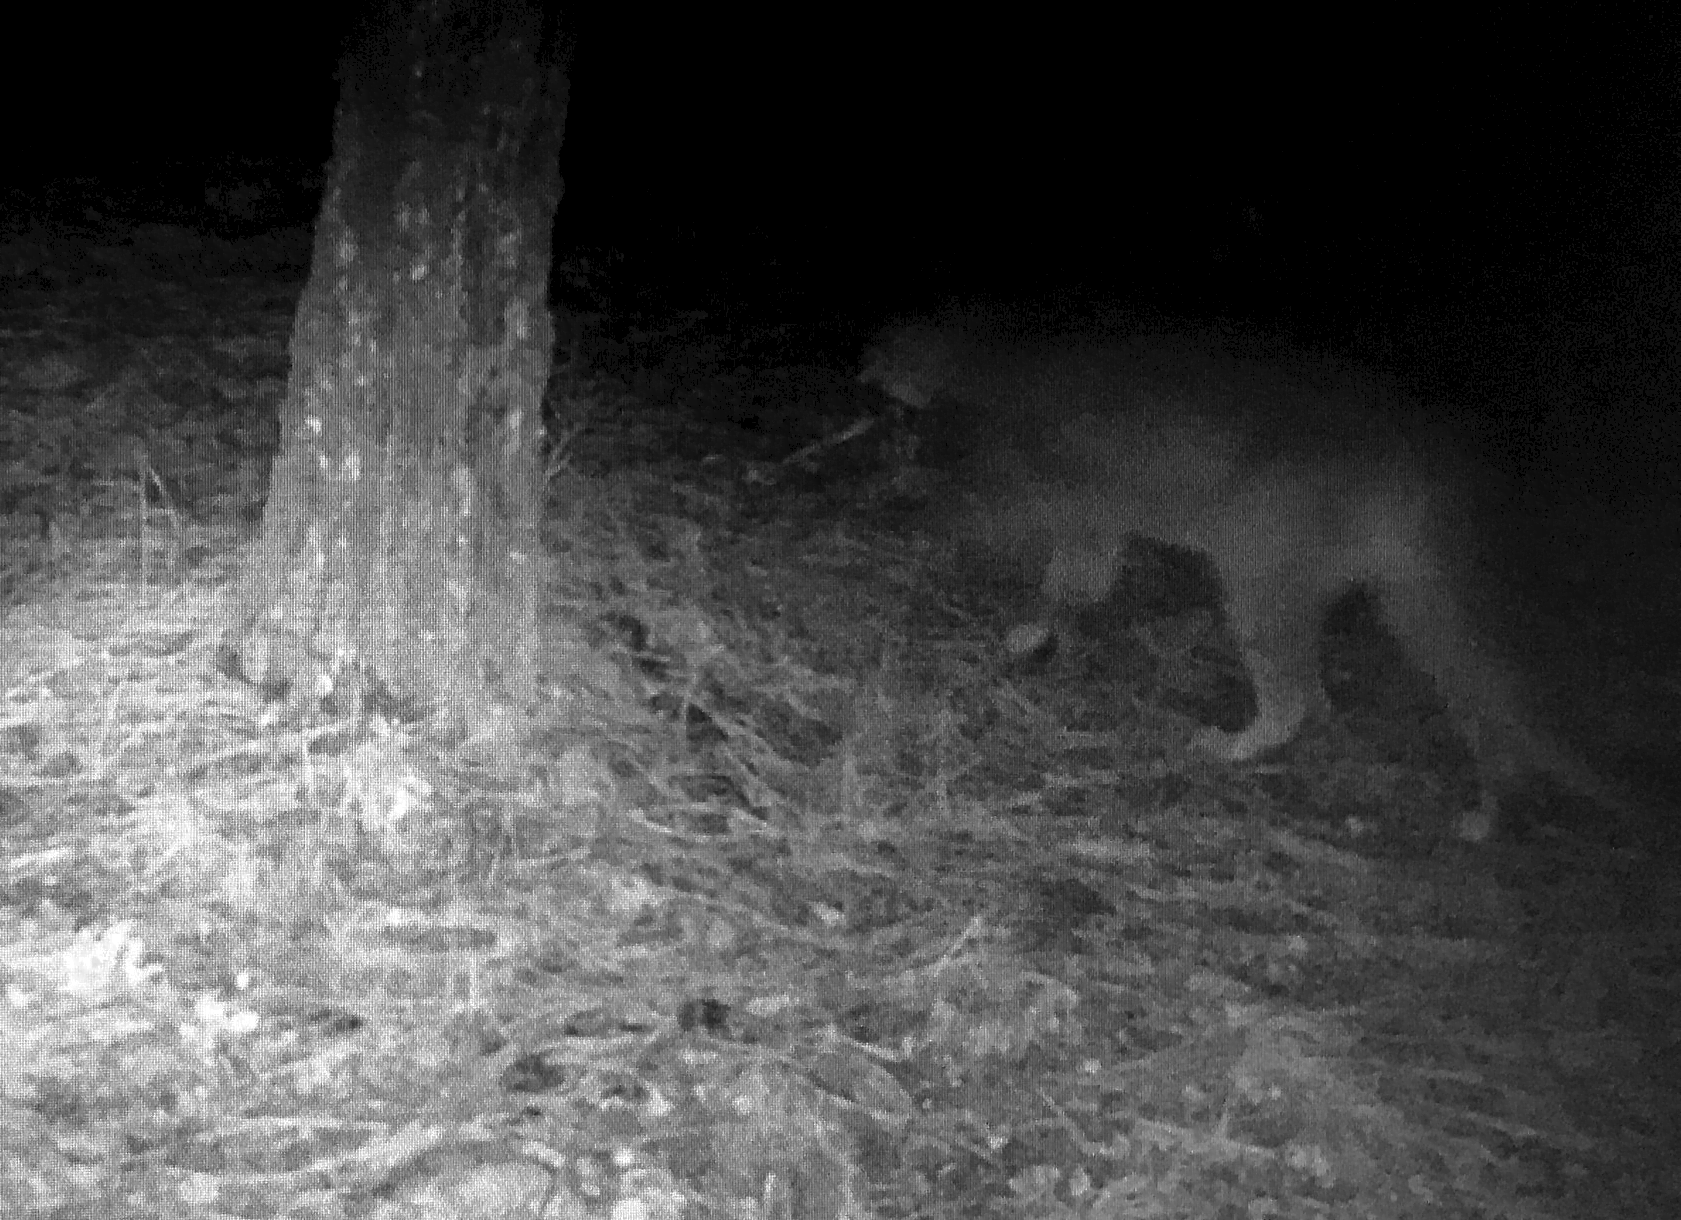 Cougar Caught on Game Camera